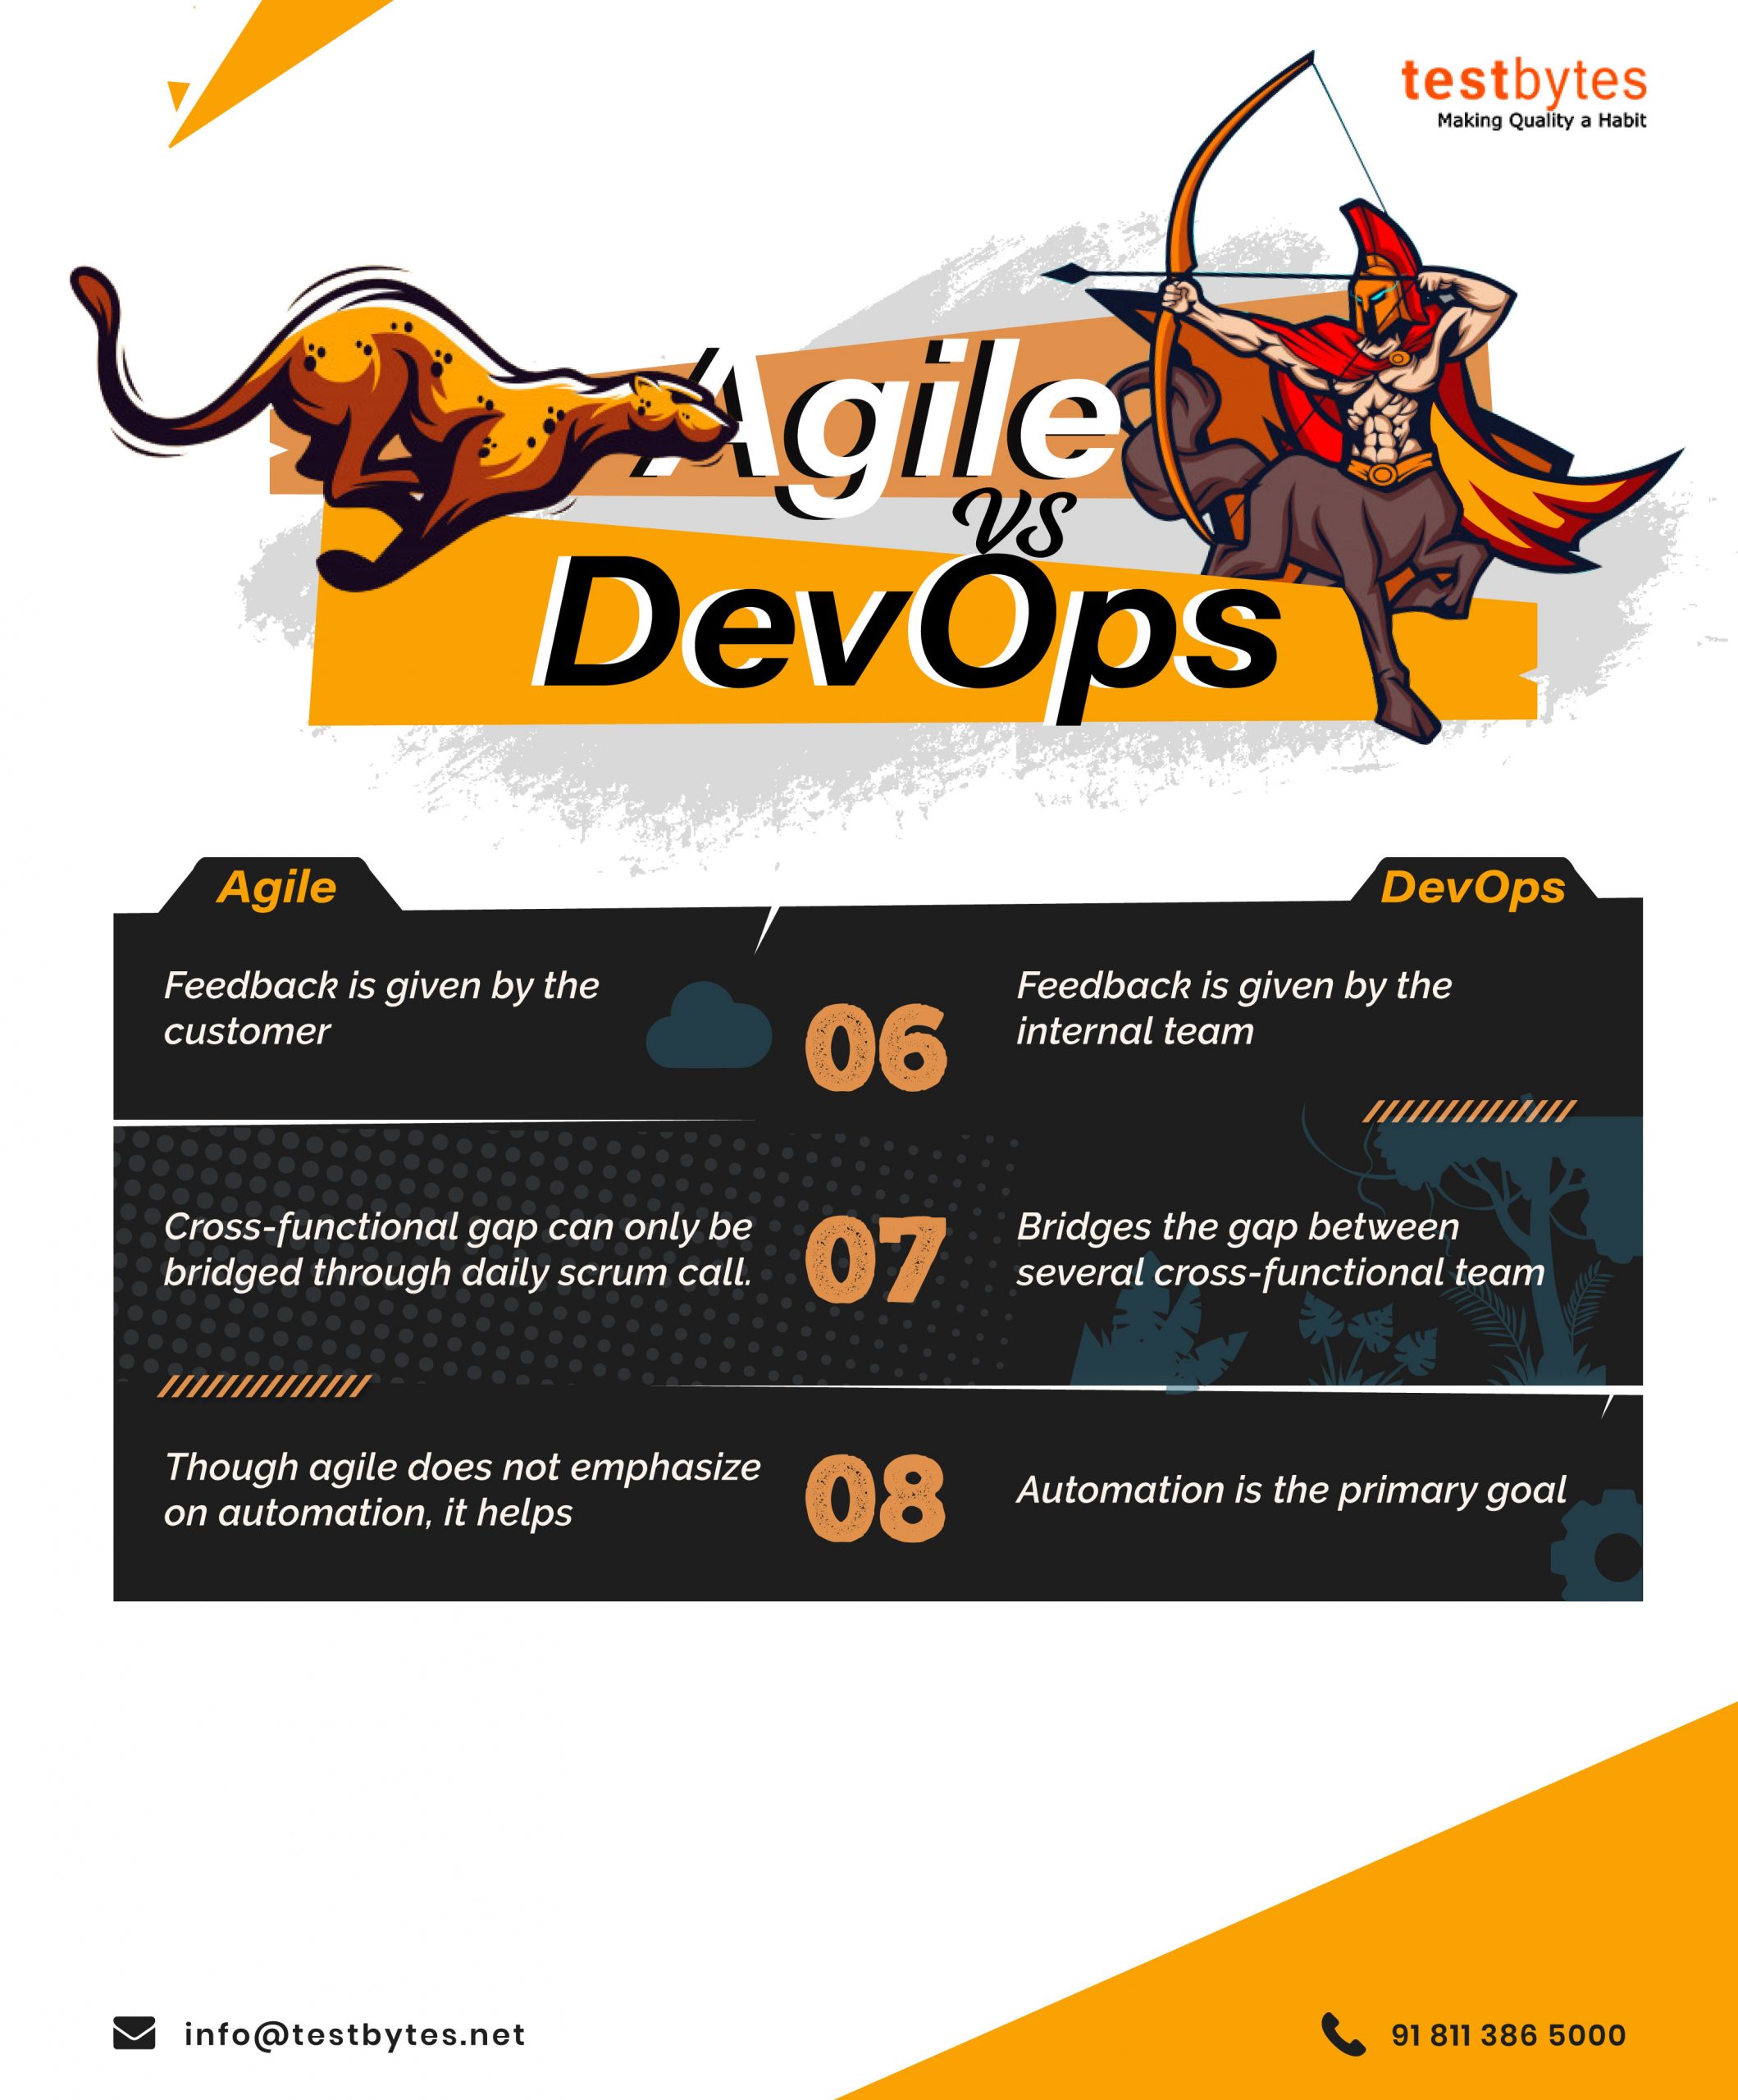 difference between agile and devops